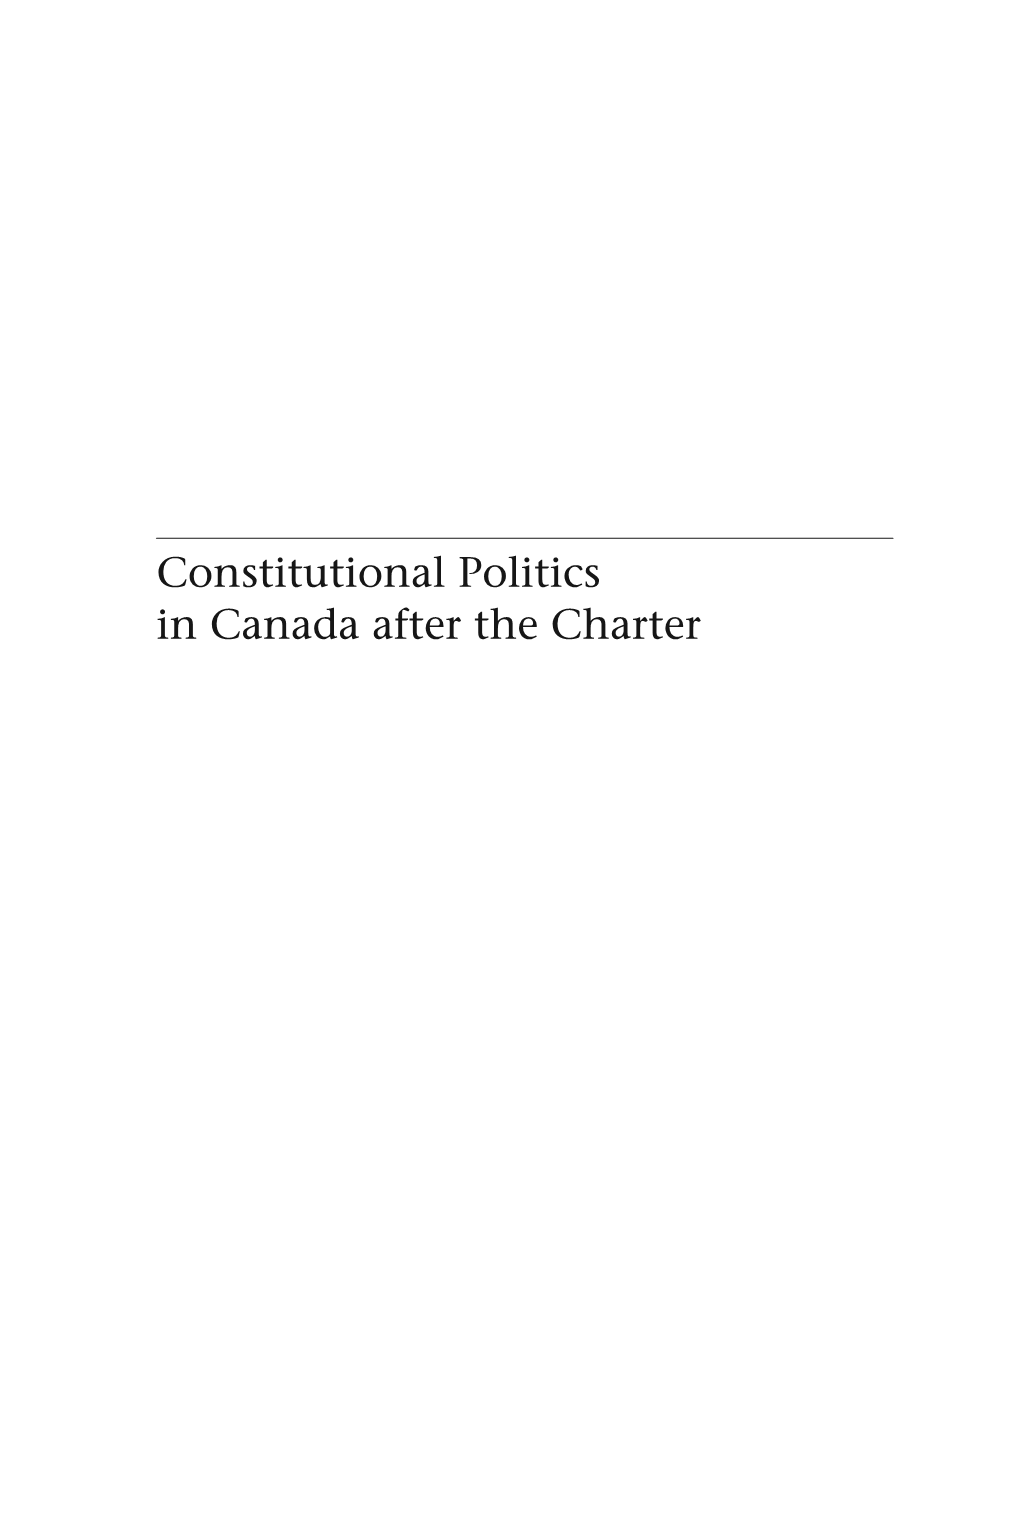 Constitutional Politics in Canada After the Charter